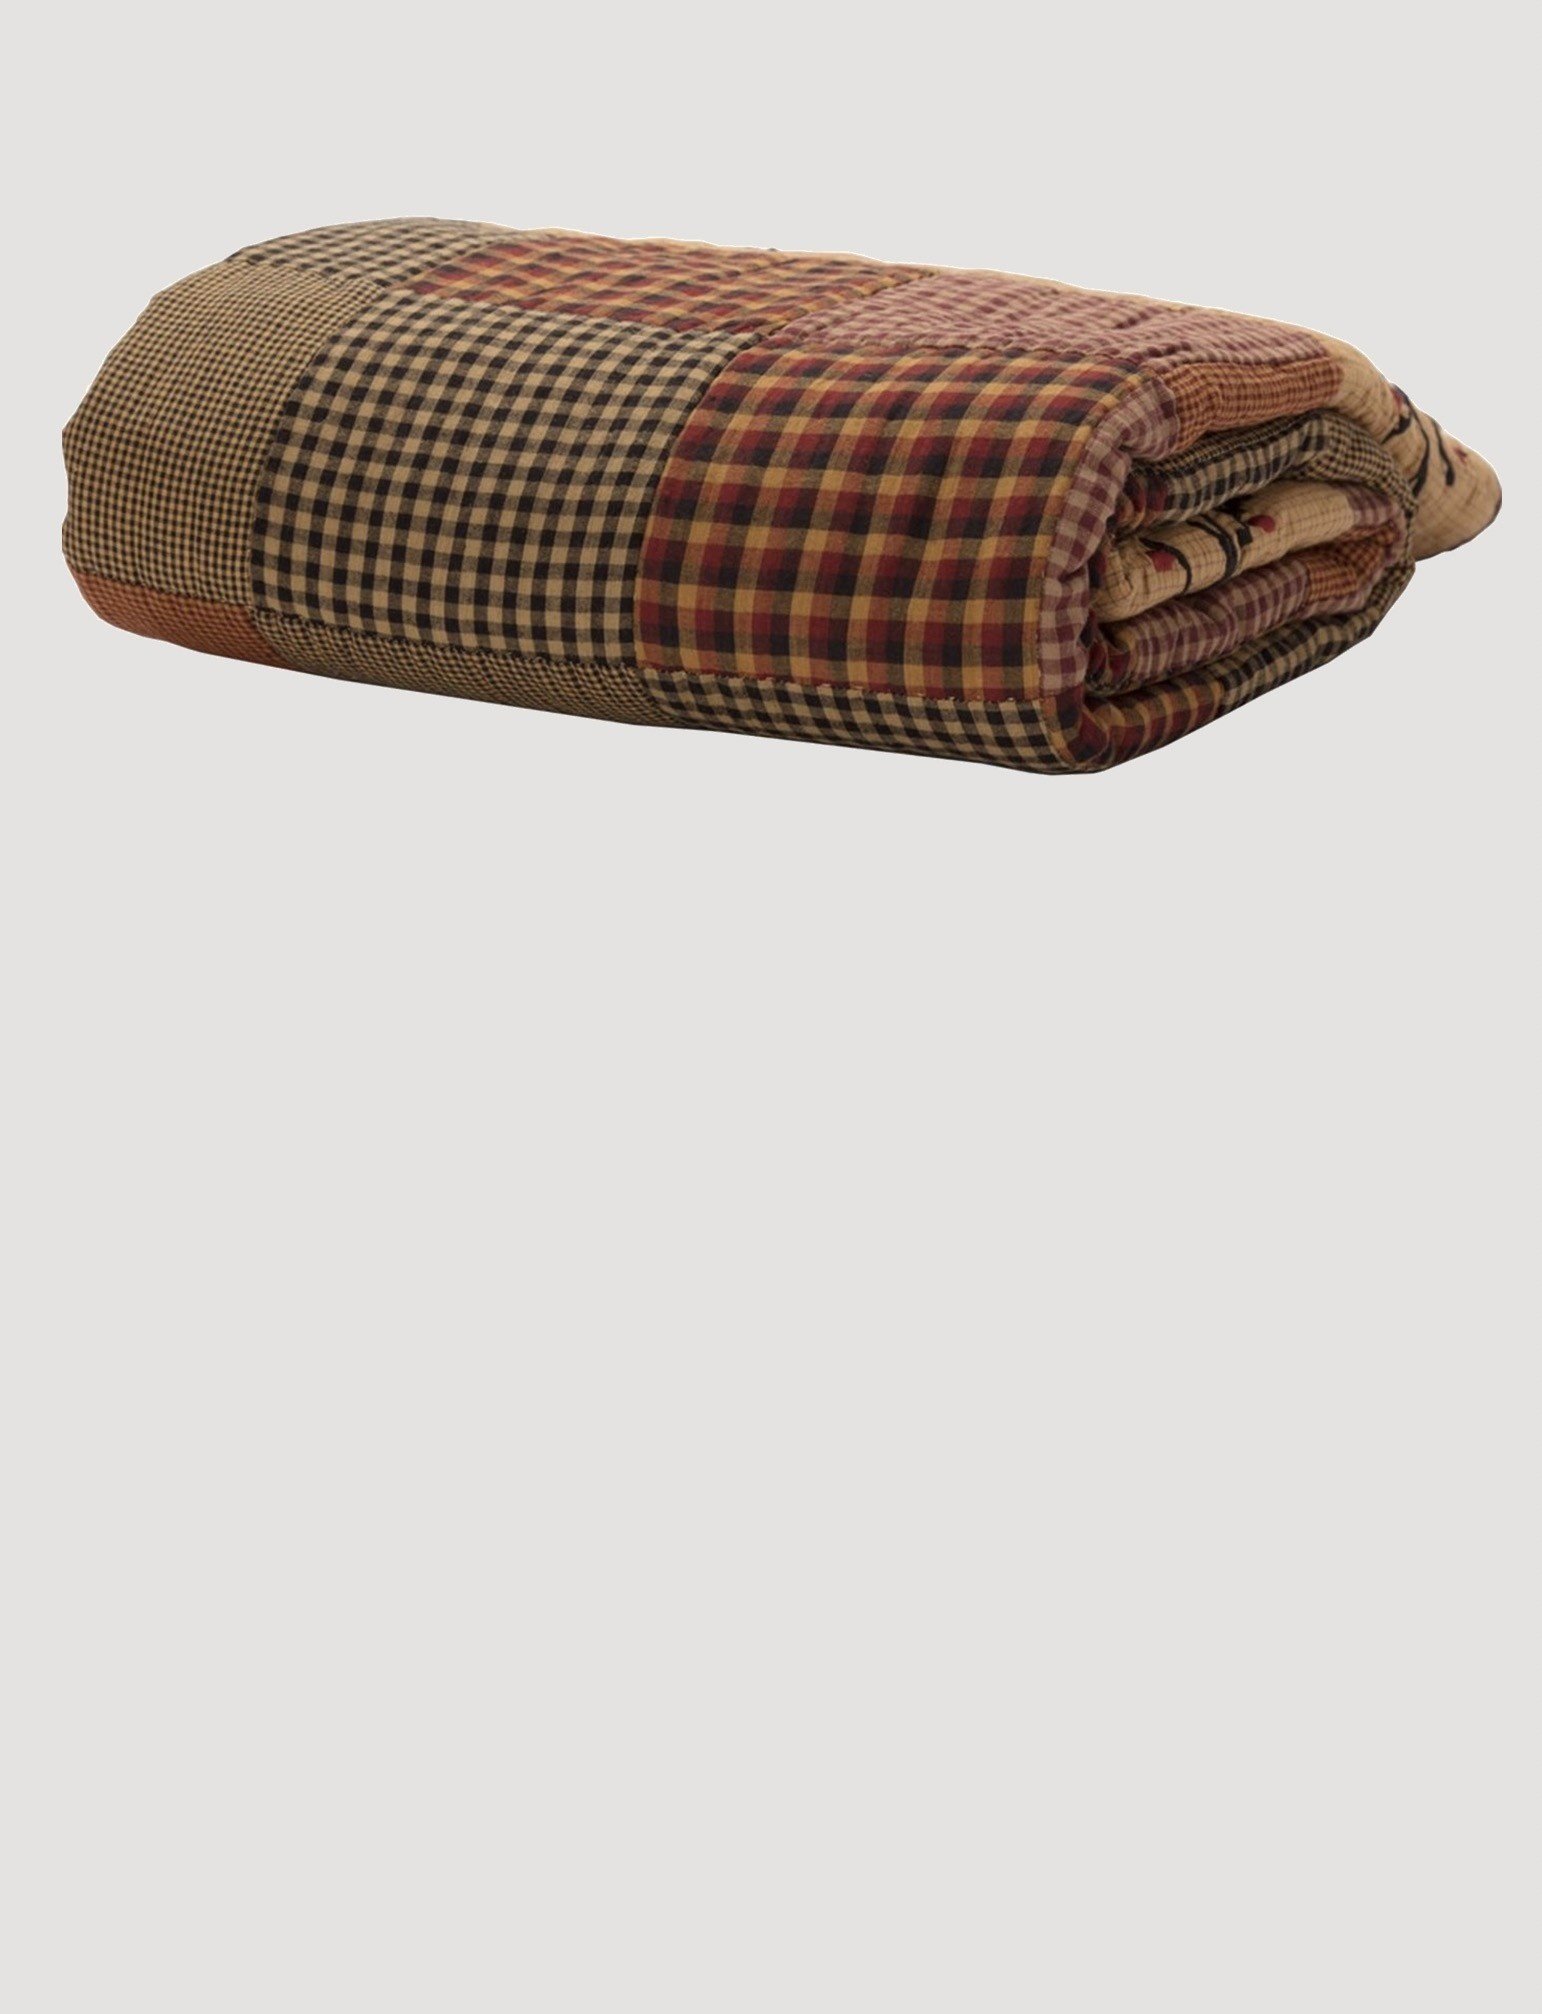 VHC Brands Heritage Farms Crow and Star Quilted Throw Brand: VHC Brands